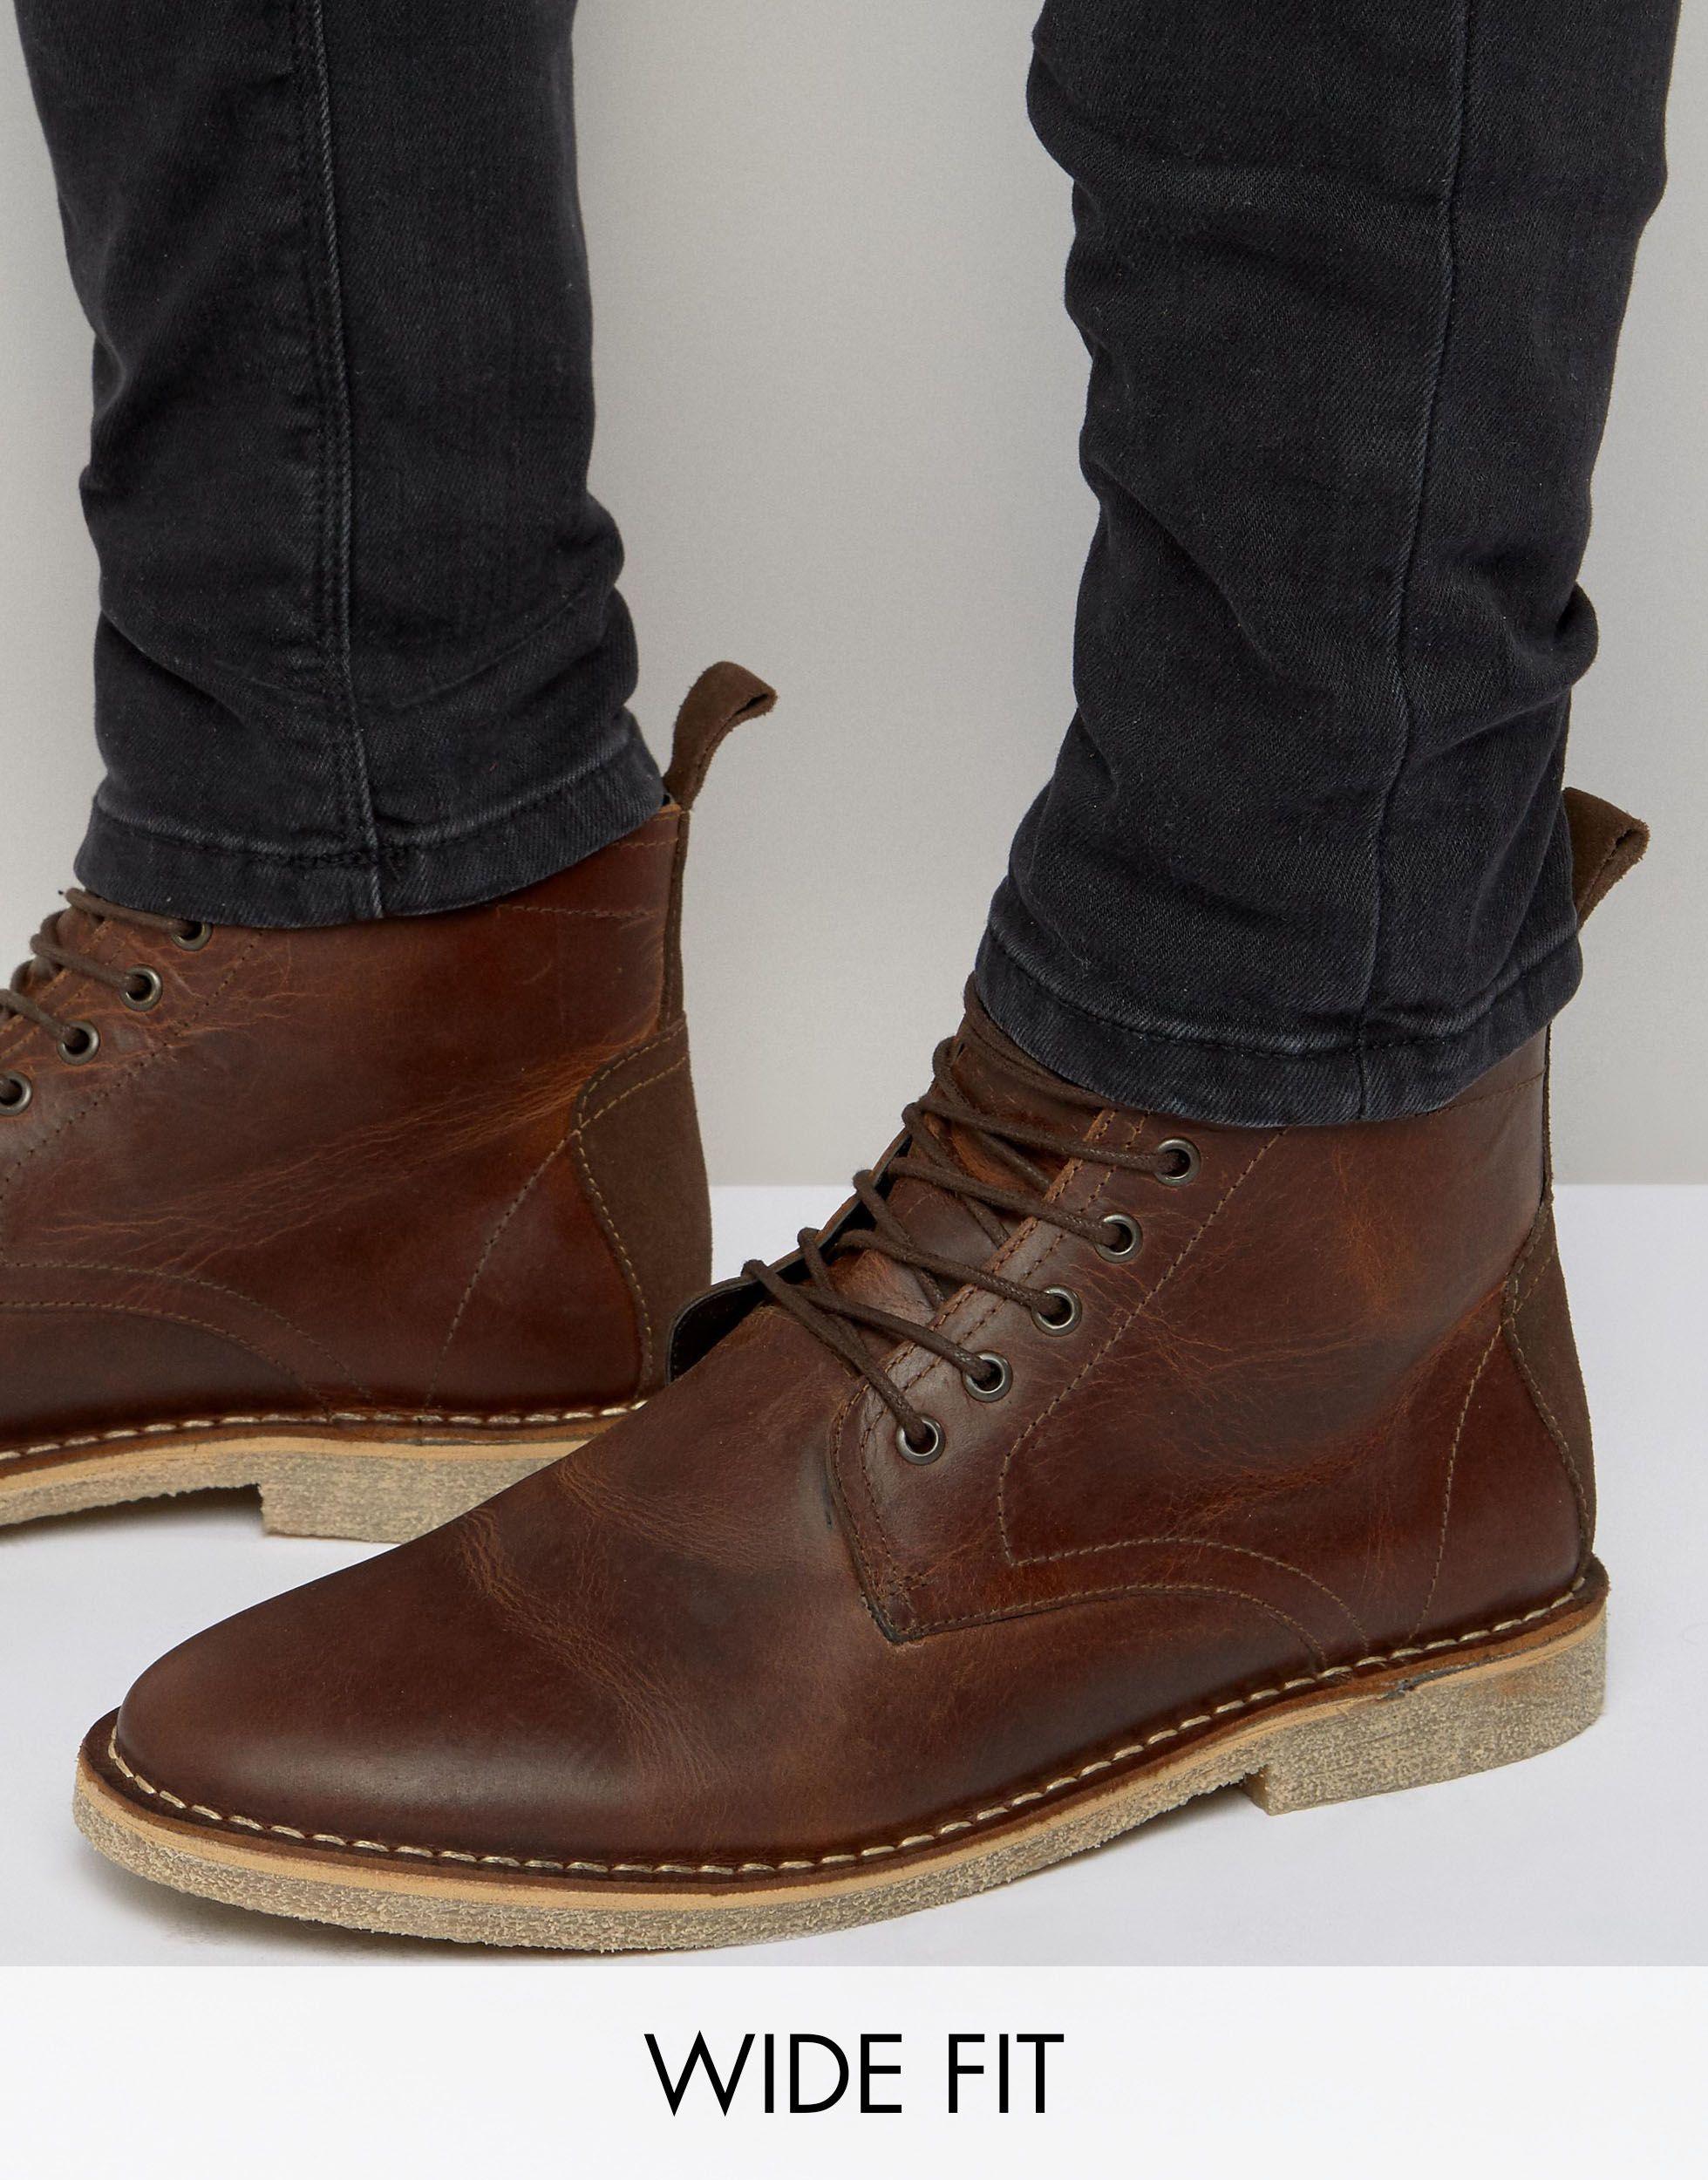 ASOS Leather Wide Fit Desert Chukka Boots in Tan (Brown) for Men - Lyst